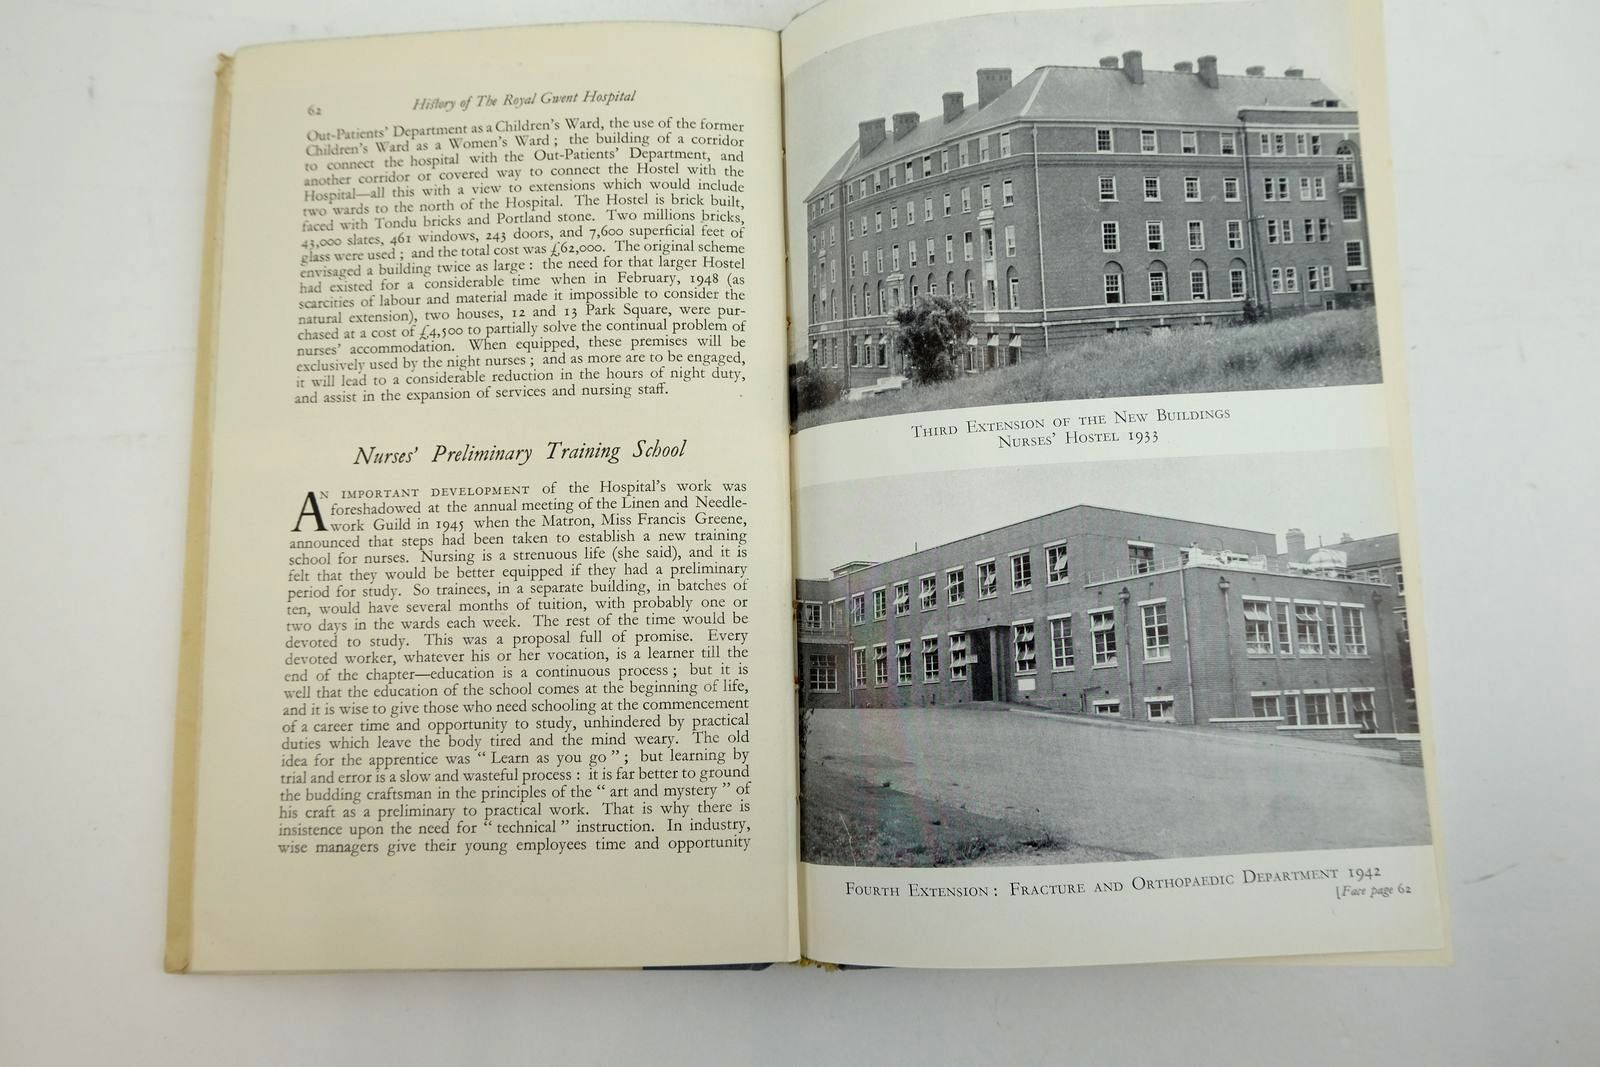 Photo of HISTORY OF THE ROYAL GWENT HOSPITAL 1839-1948 written by Jones, Thomas Baker
Collins, W.J. Townsend published by R.H. Johns (STOCK CODE: 2134442)  for sale by Stella & Rose's Books